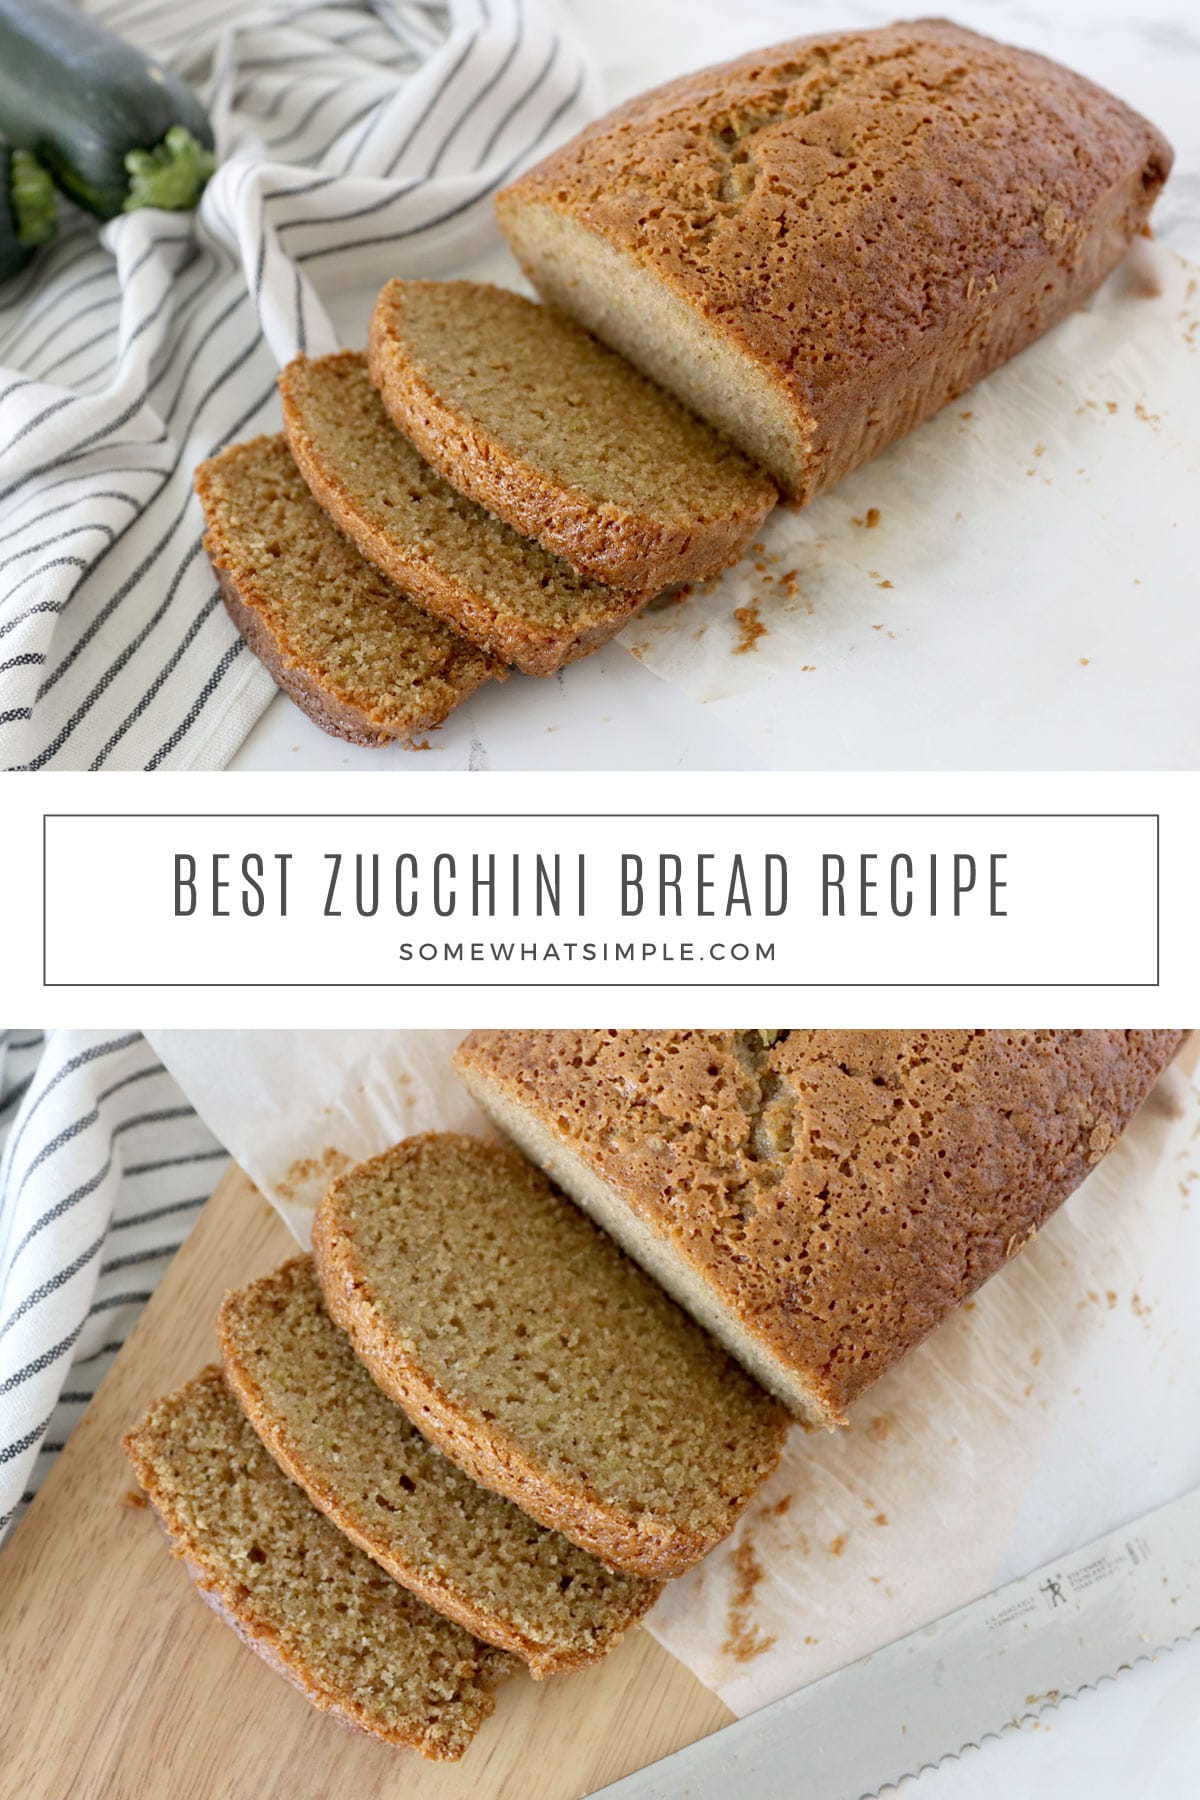 This recipe for delicious and easy zucchini bread is made with fresh zucchini and simple ingredients. It’s moist and flavorful, and a single slice can satisfy any sweet craving! via @somewhatsimple